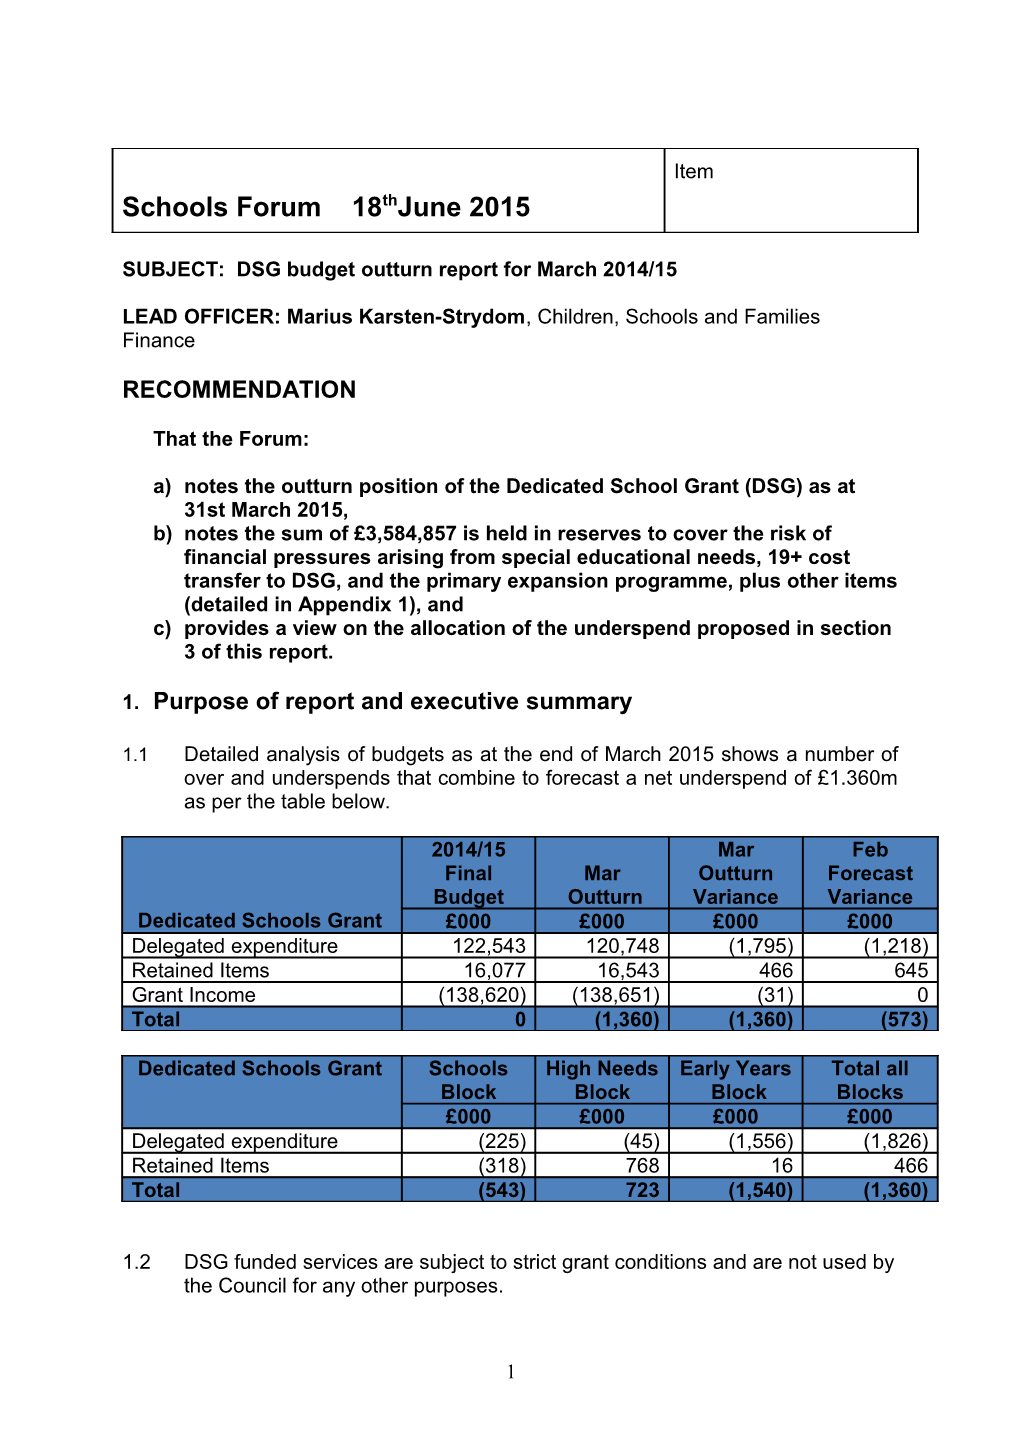 SUBJECT: DSG Budget Outturn Report for March 2014/15